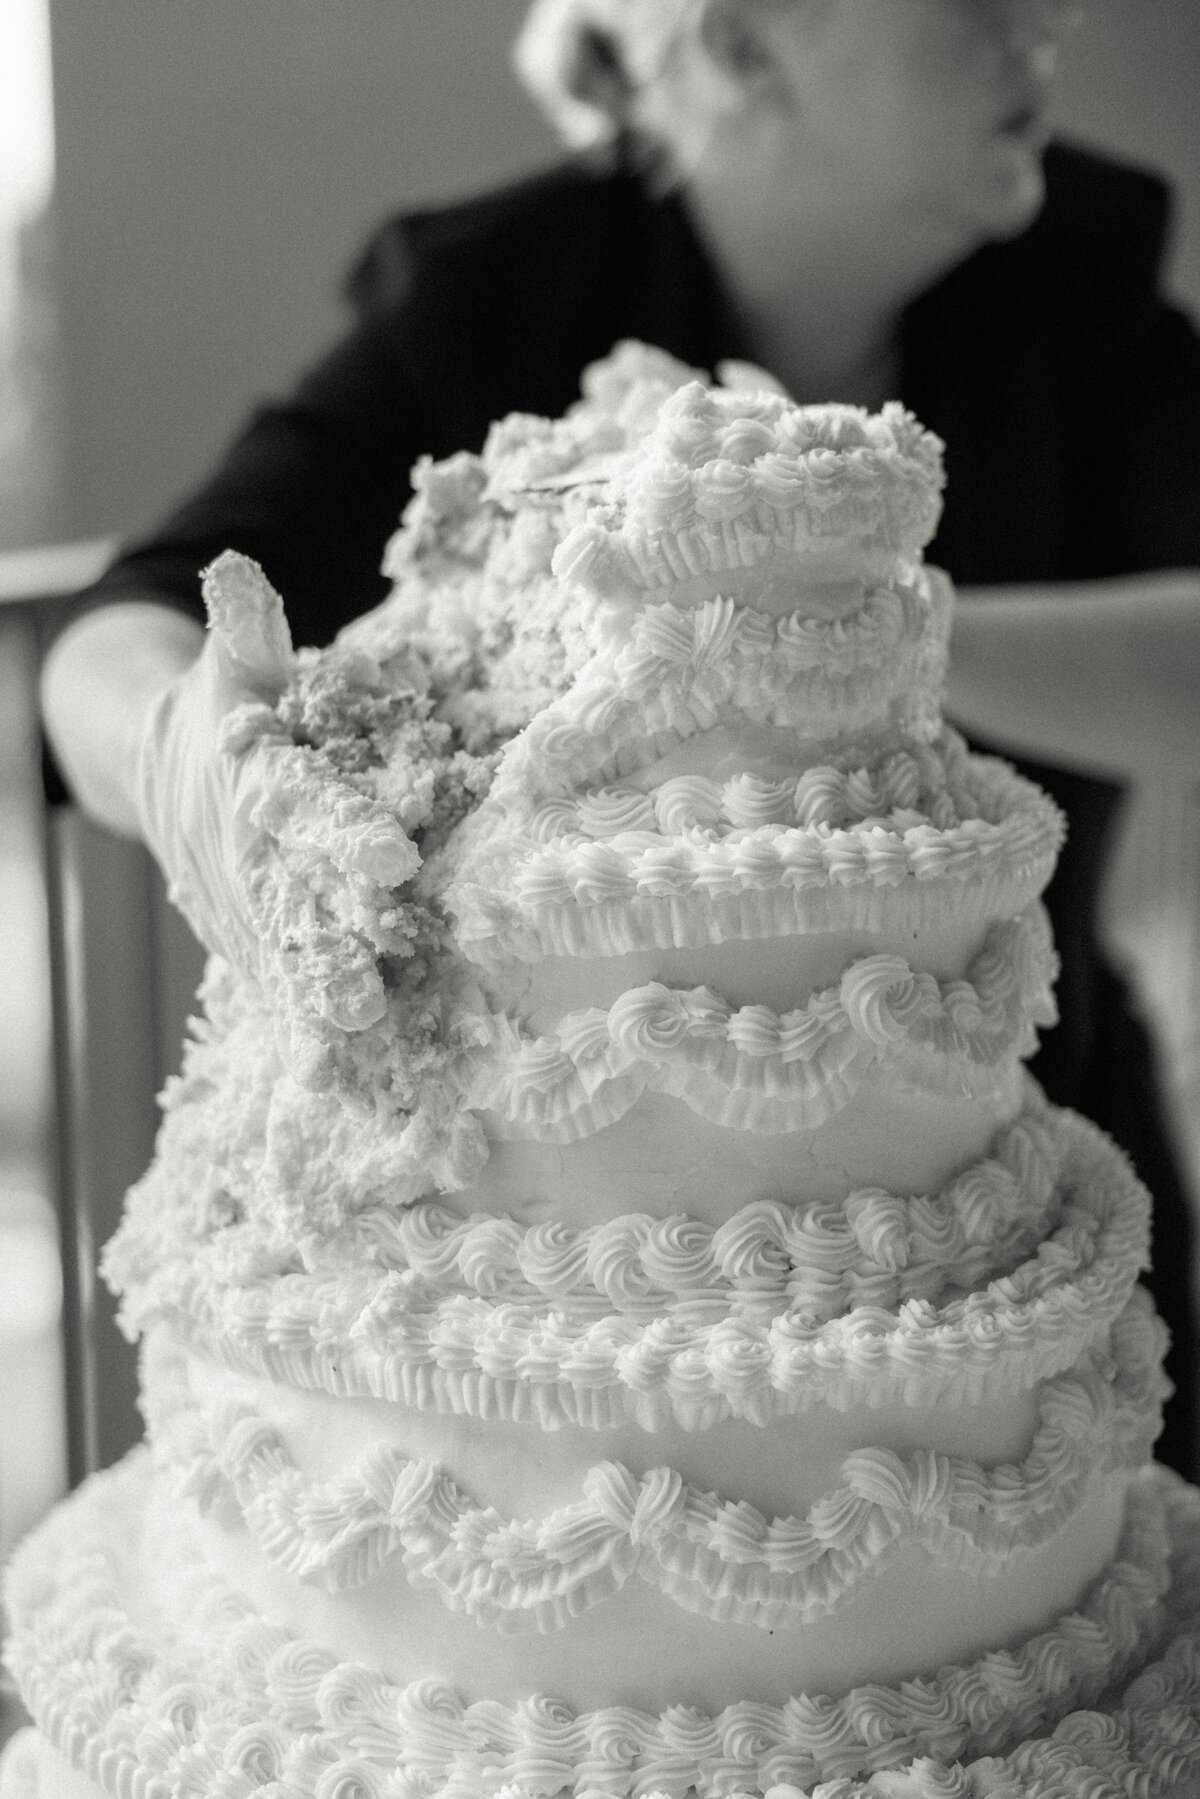 worker golding wedding cake together as it melts